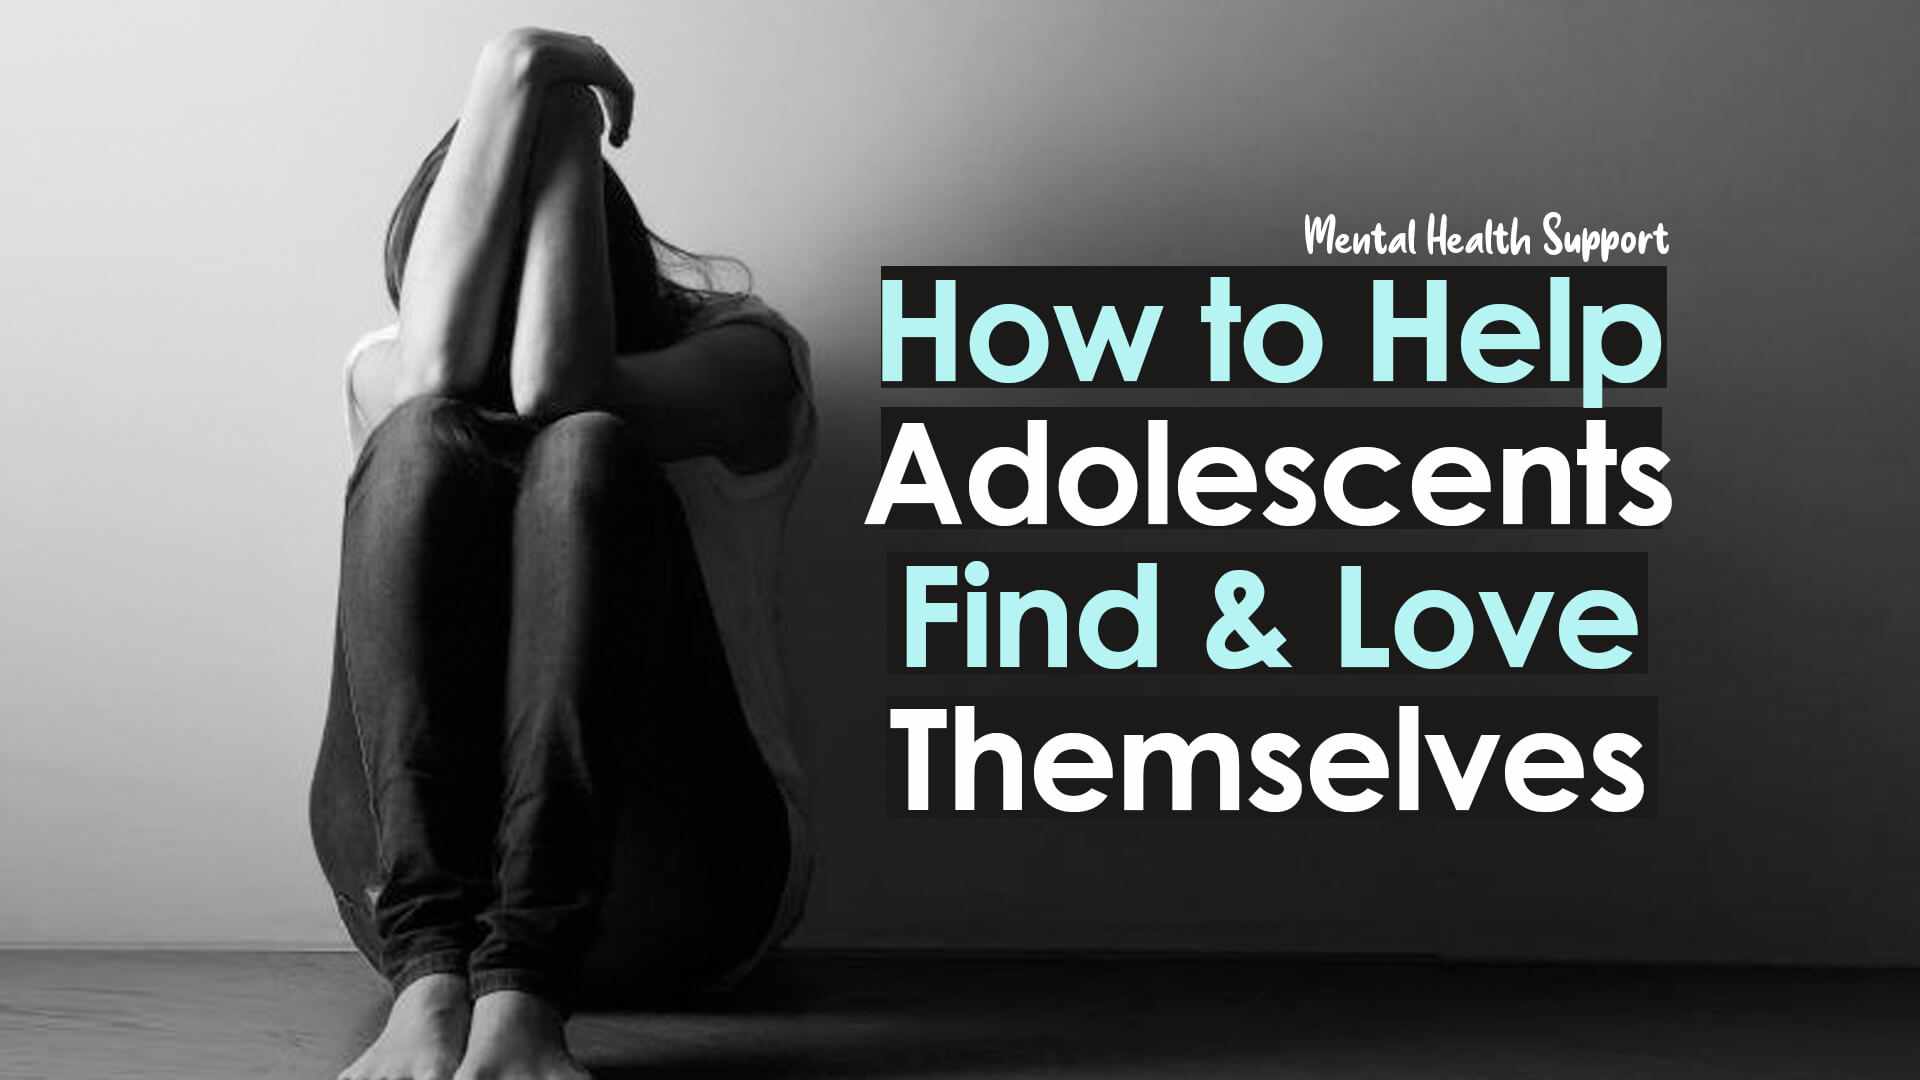 Adolescent Mental Health: How to Help Teenagers Find & Love Themselves